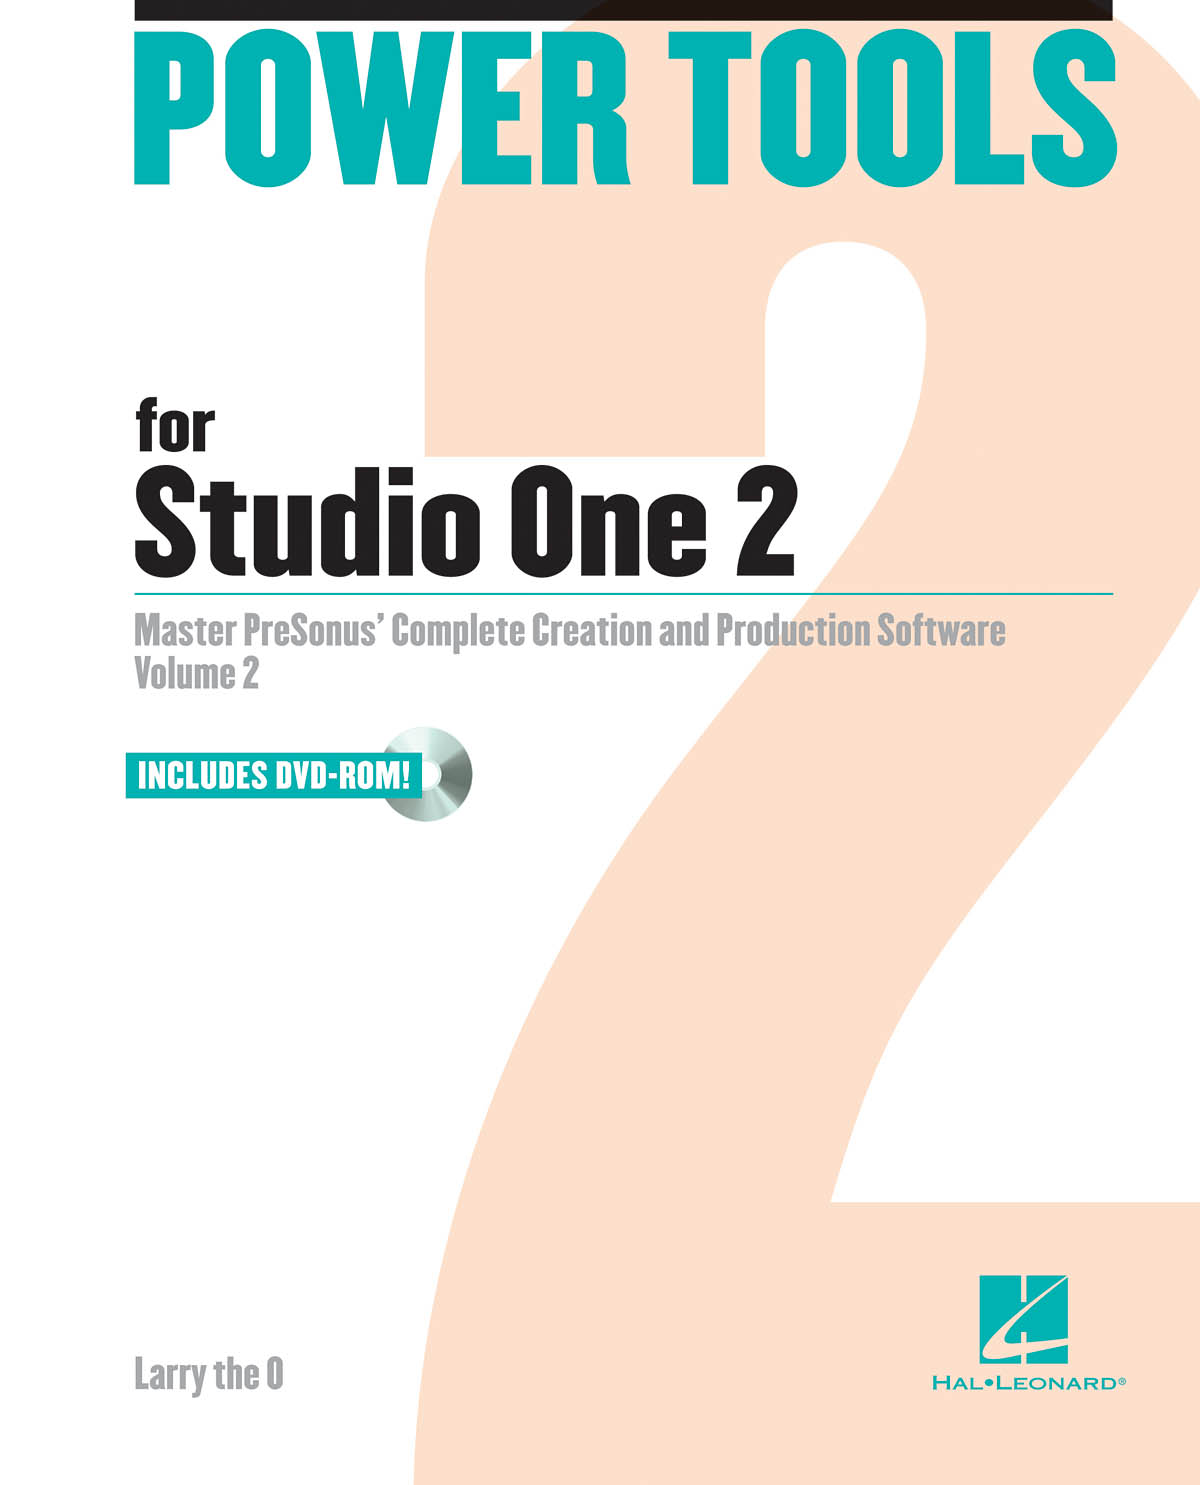 Power Tools for Studio One 2: Reference Books